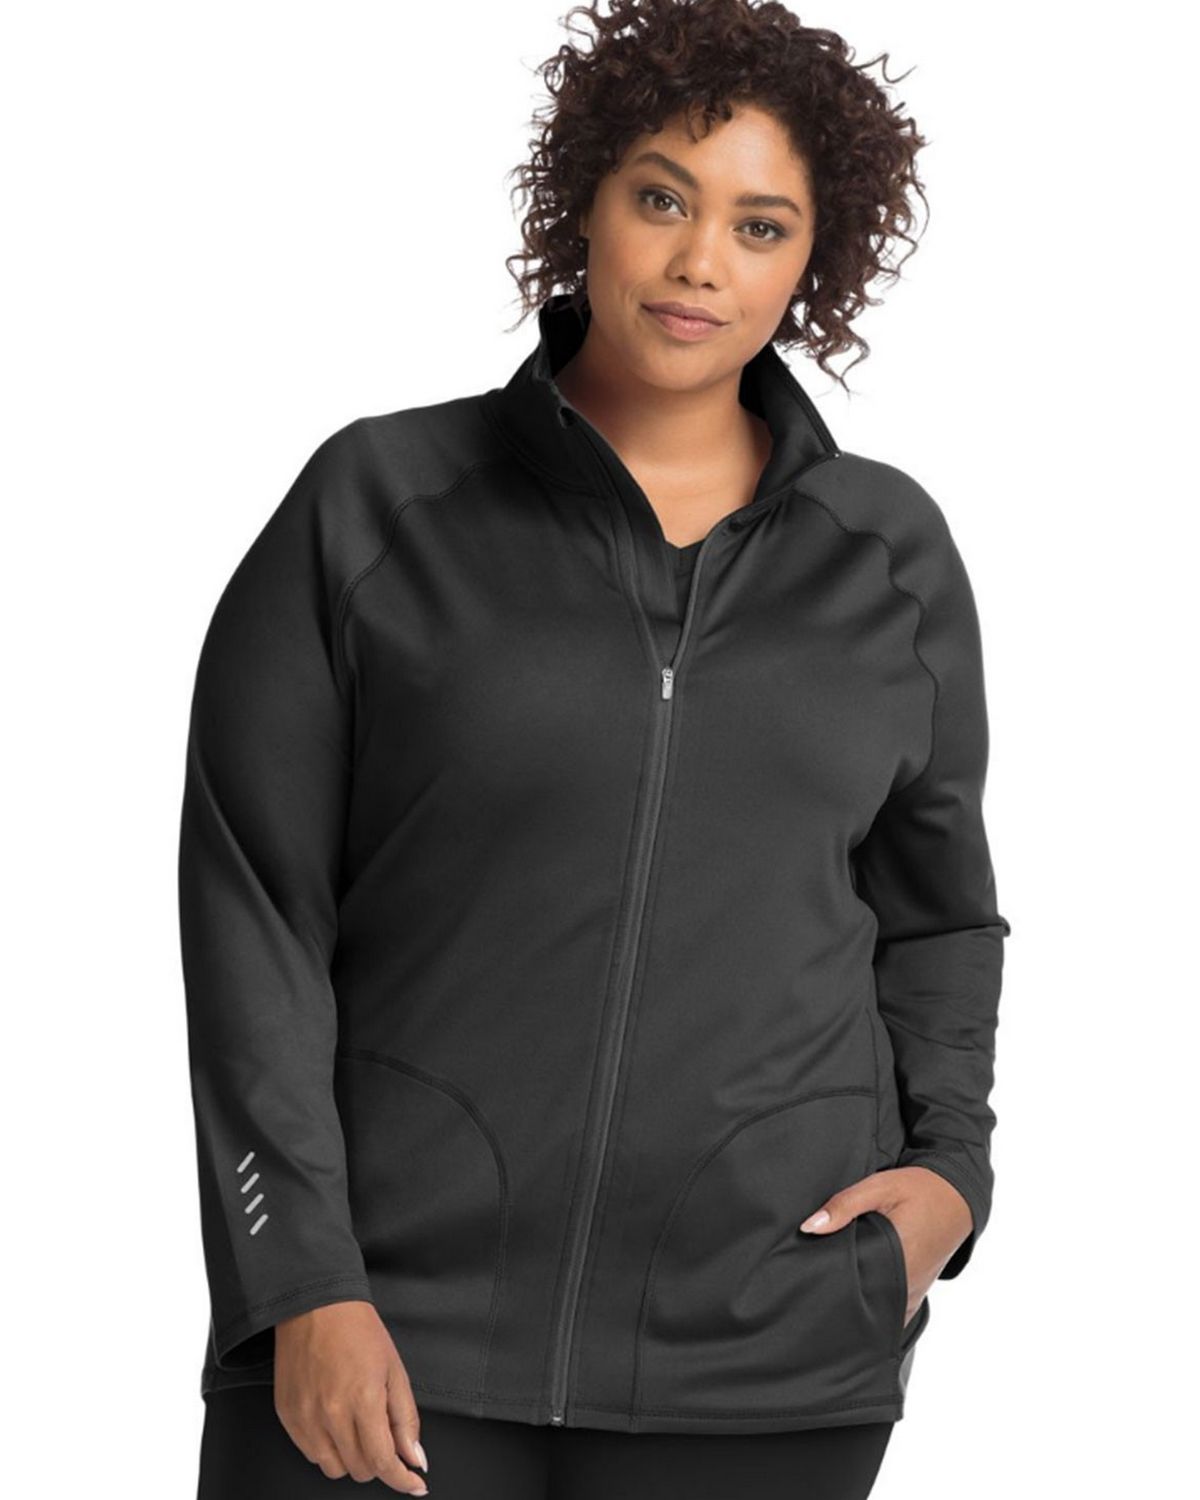 Just My Size Active Full Zip Jacket Size 1X 5X 0J906